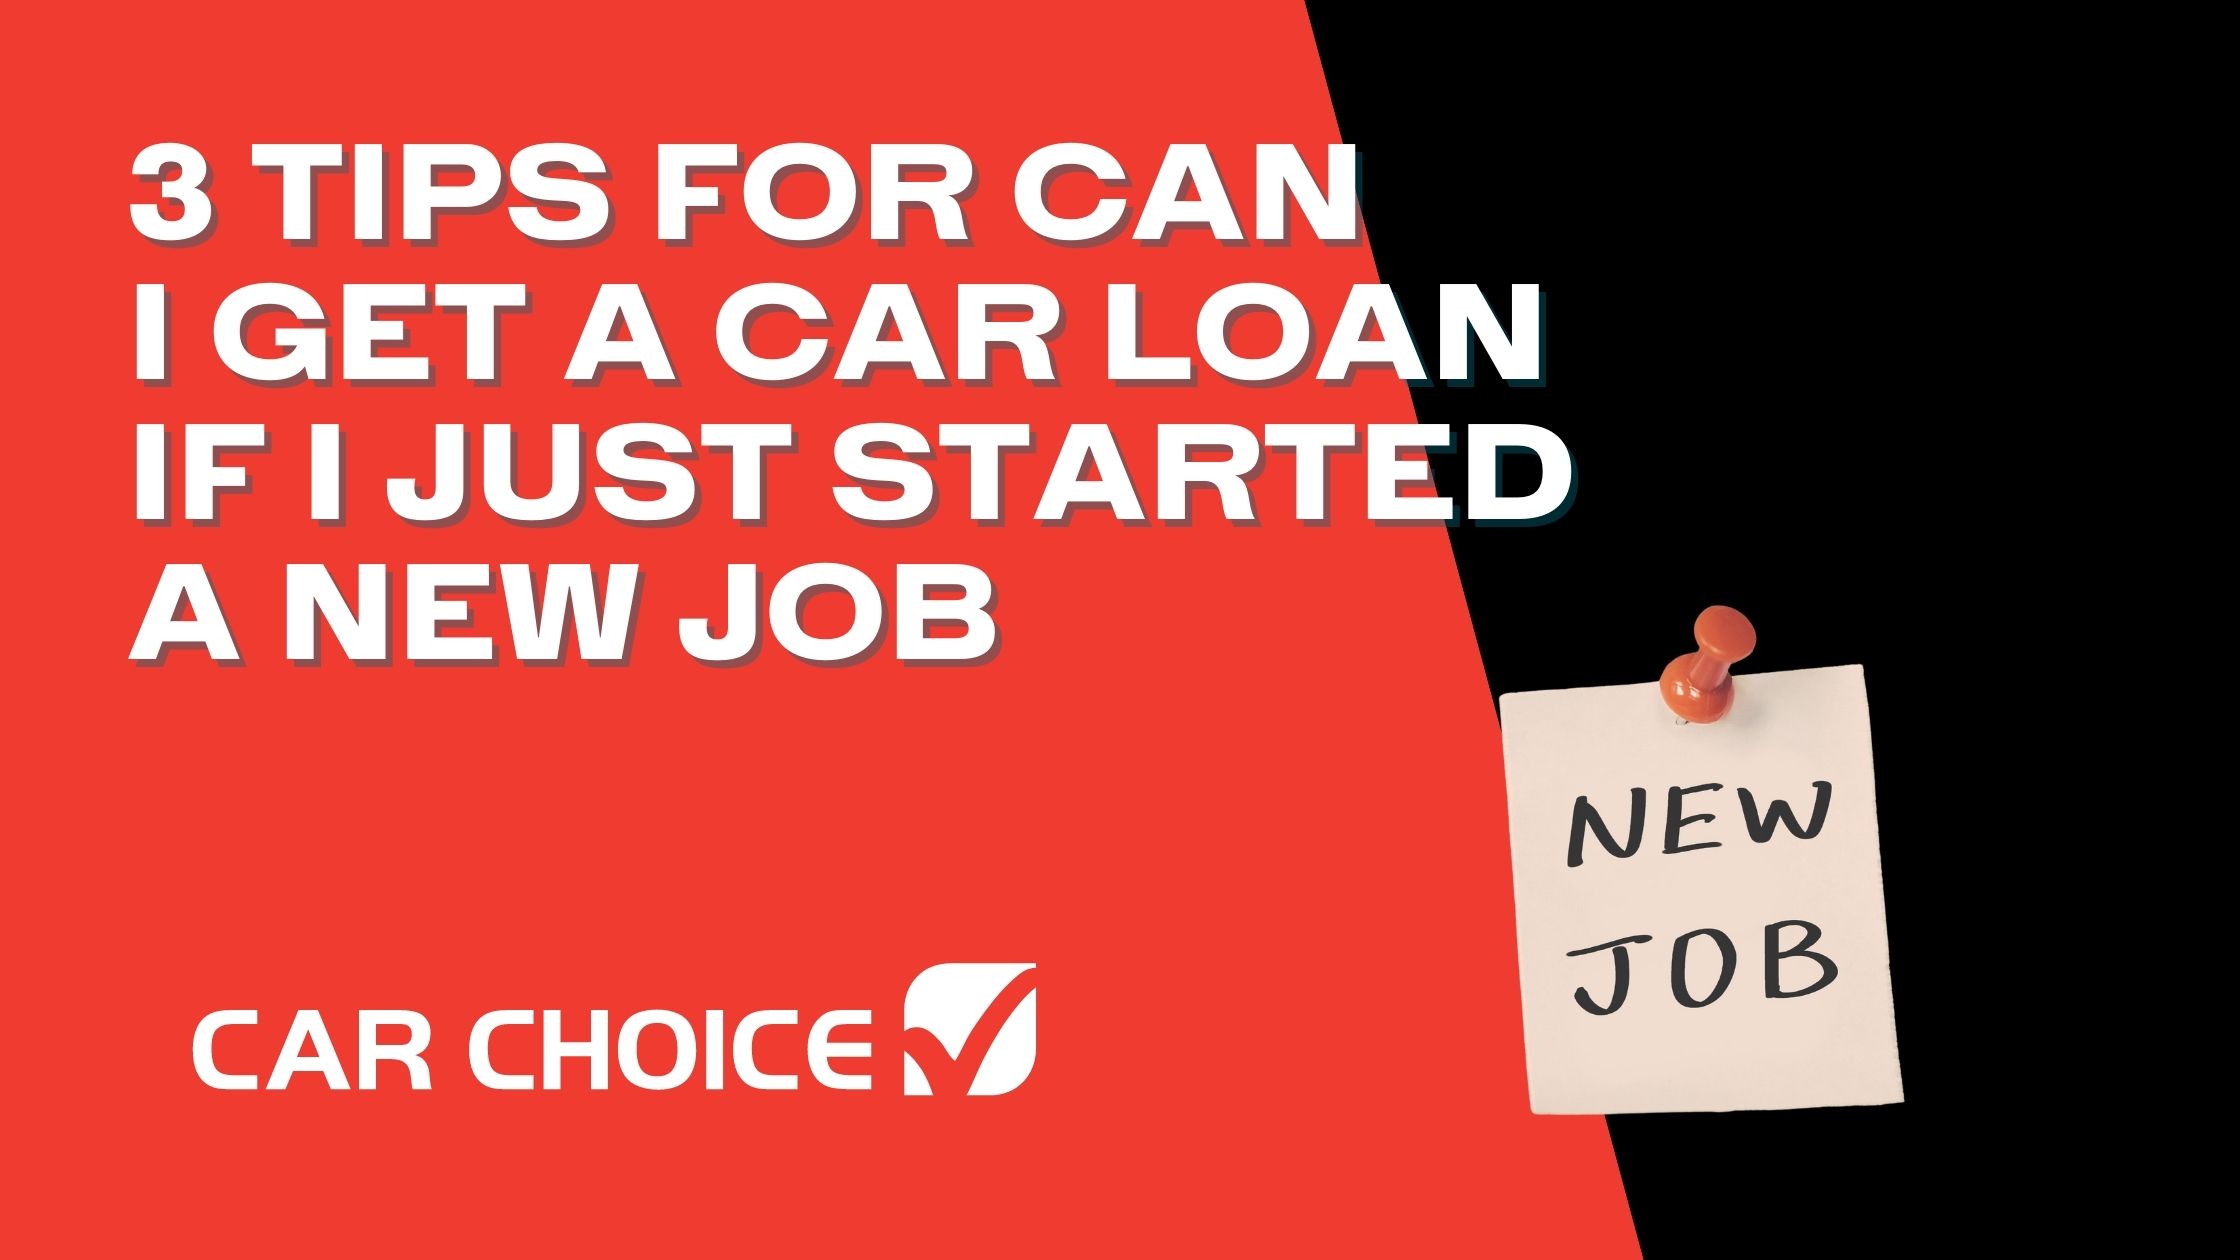 3 Tips for Can I Get a Car Loan If I Just Started a New Job